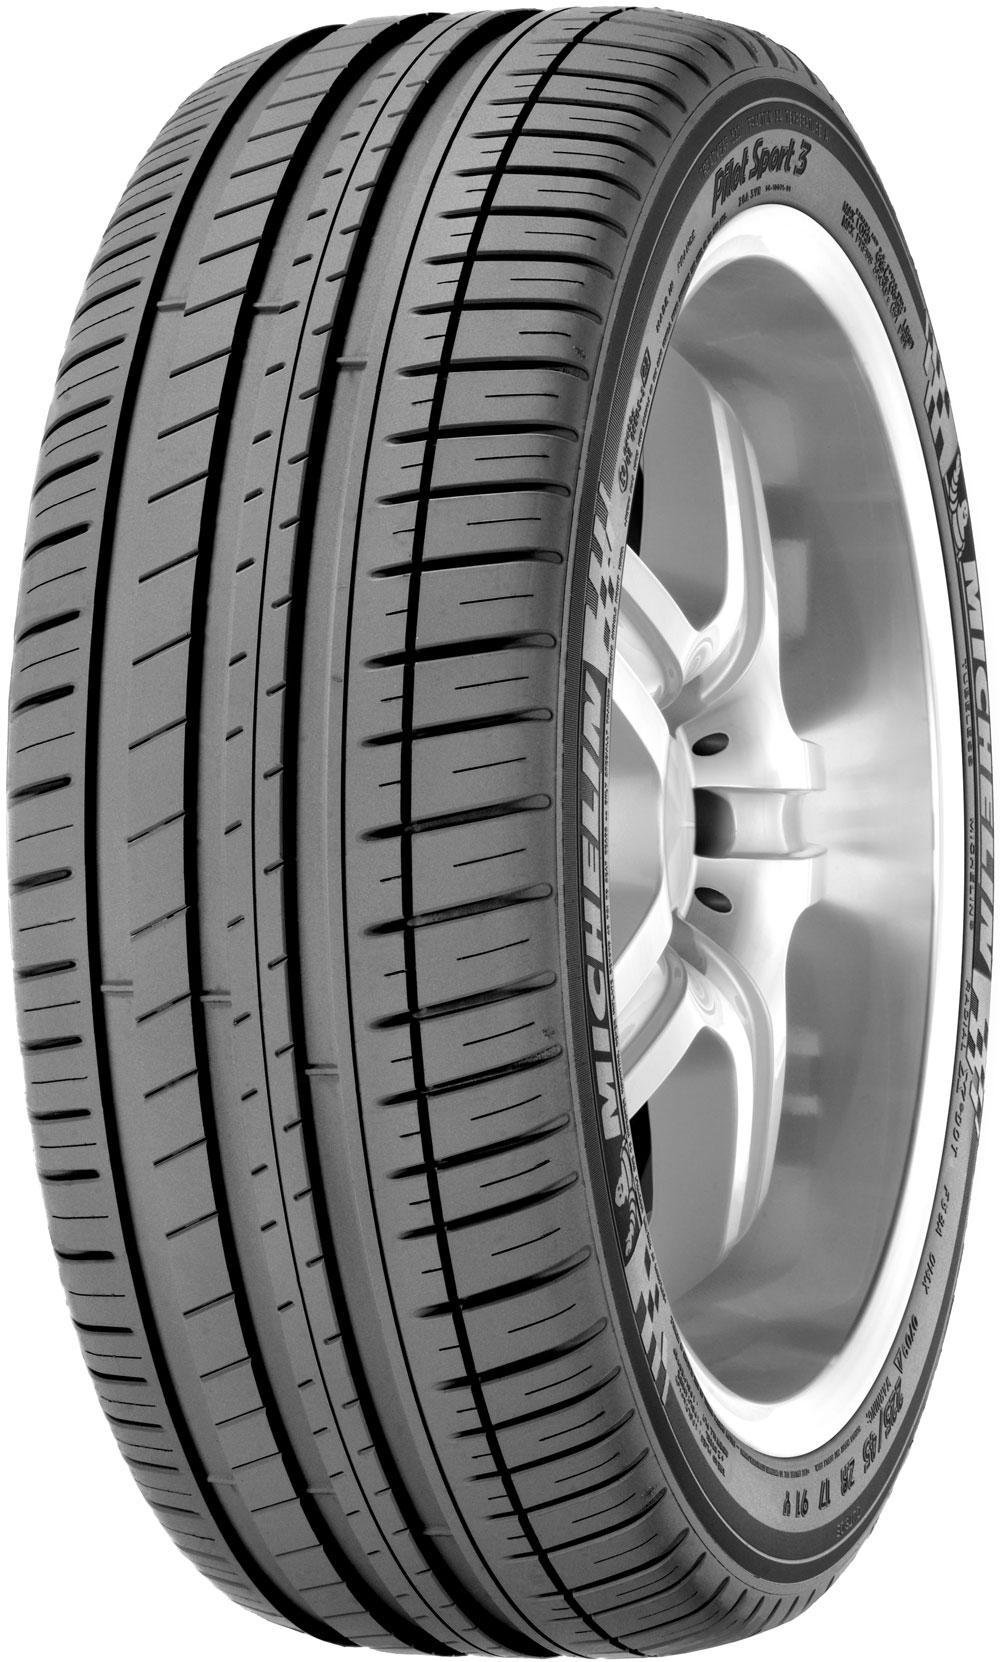 Anvelope auto MICHELIN SPORT3ACT0 XL 245/45 R19 102Y